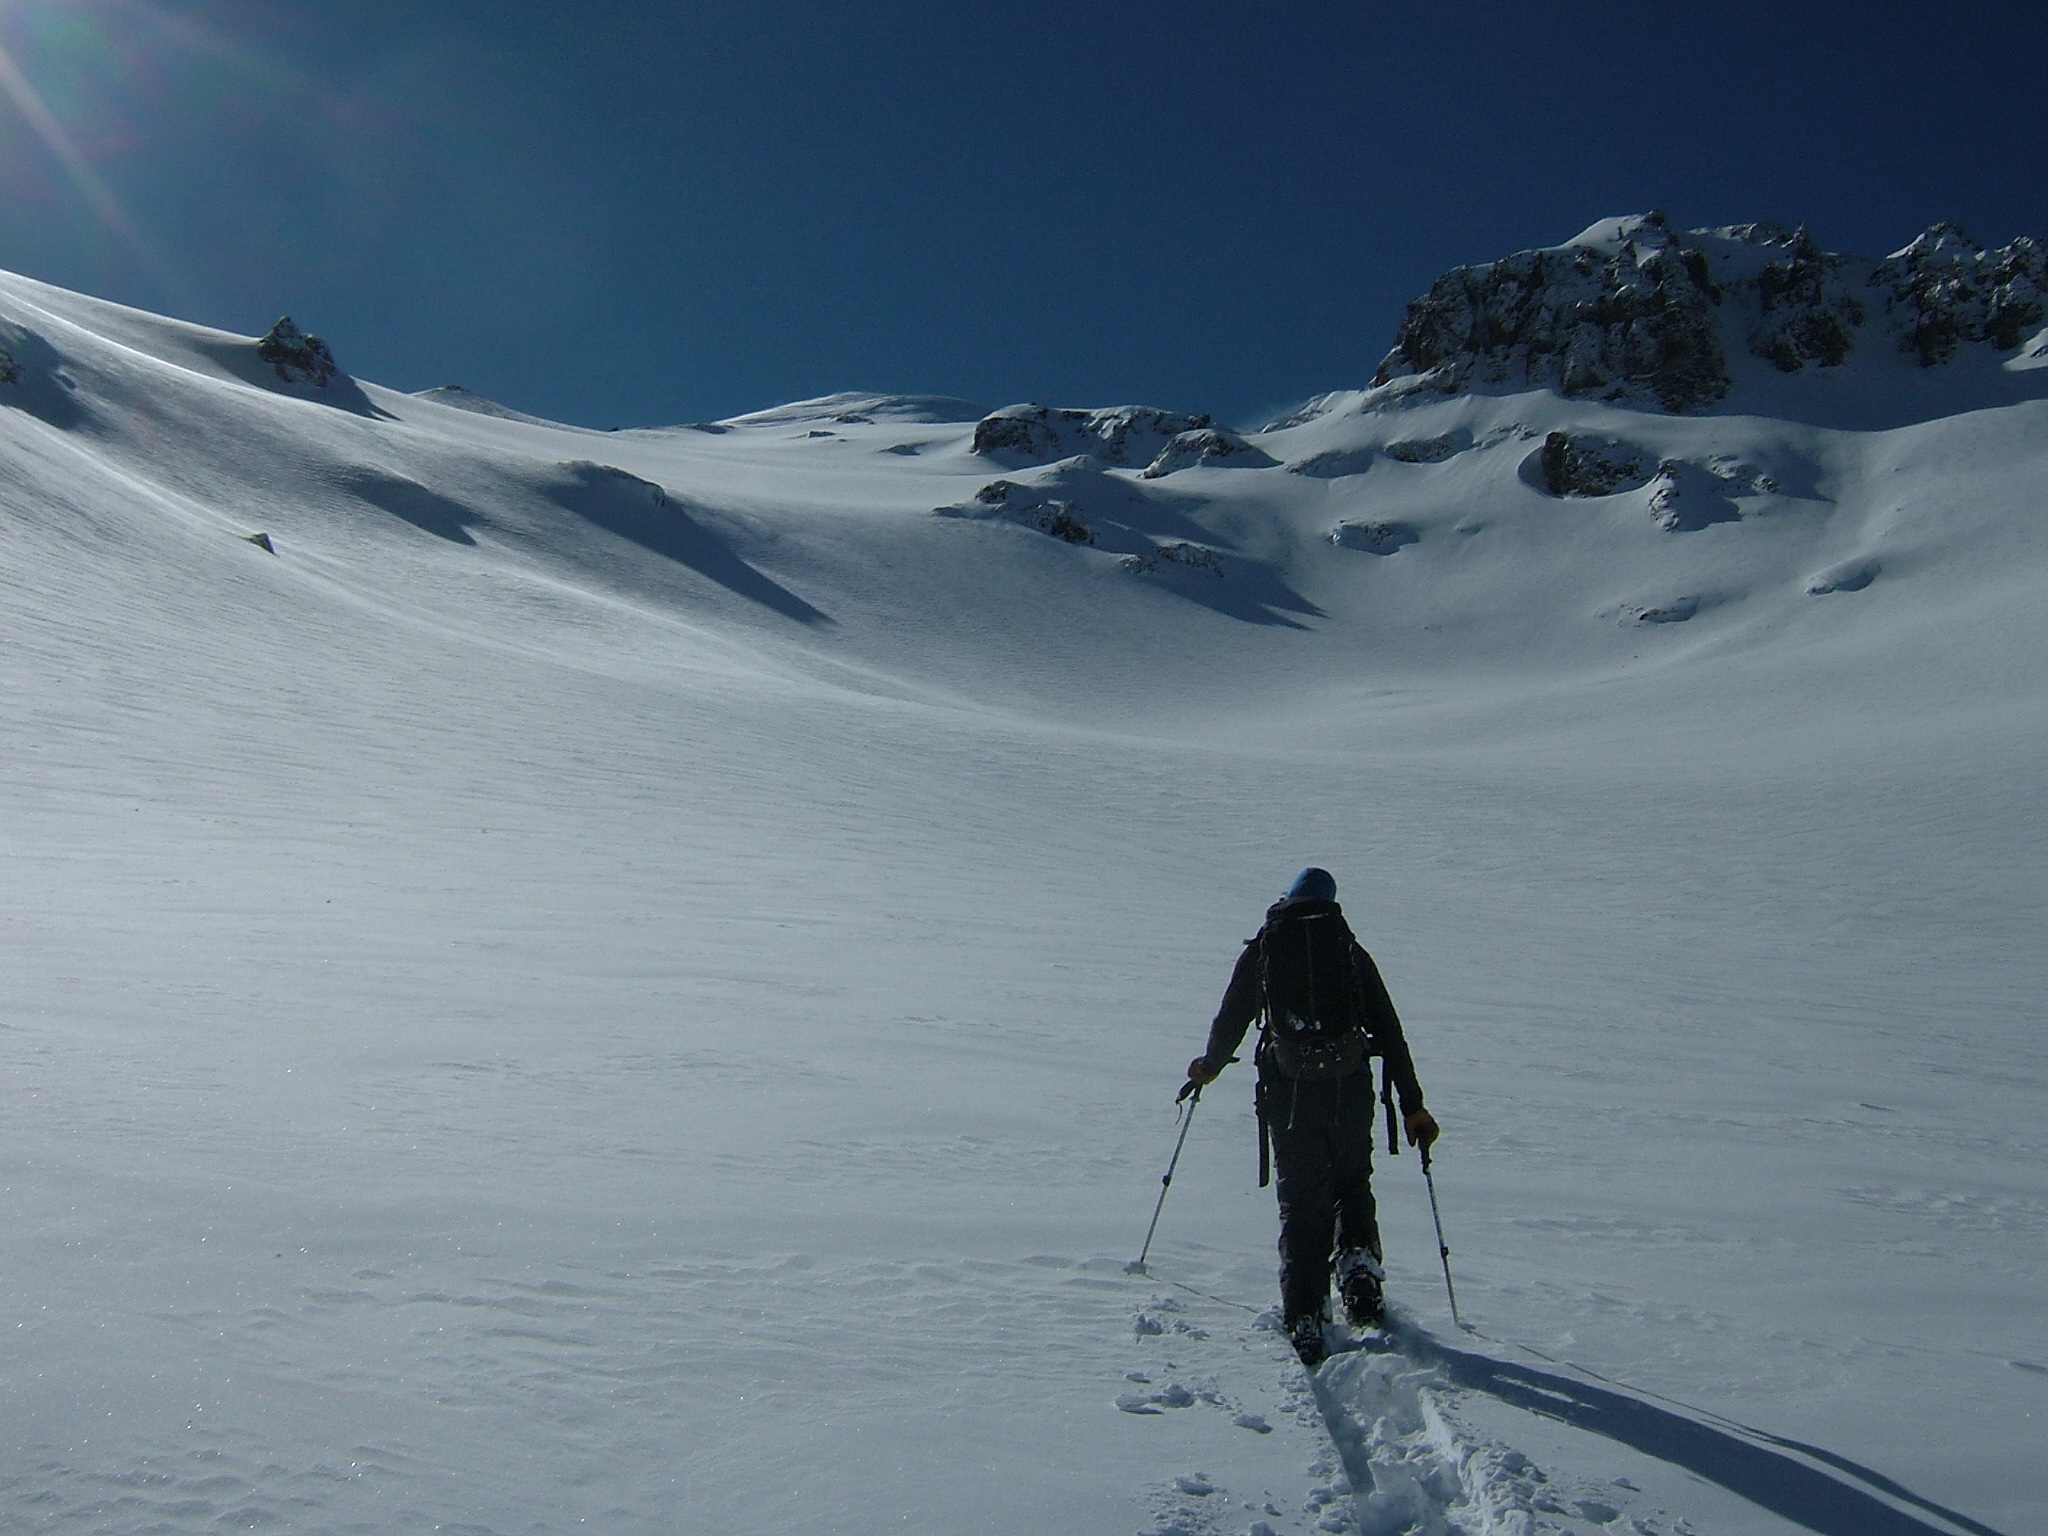 Ski touring up glacier basin to do some snowboard on the Interglacier in early spring